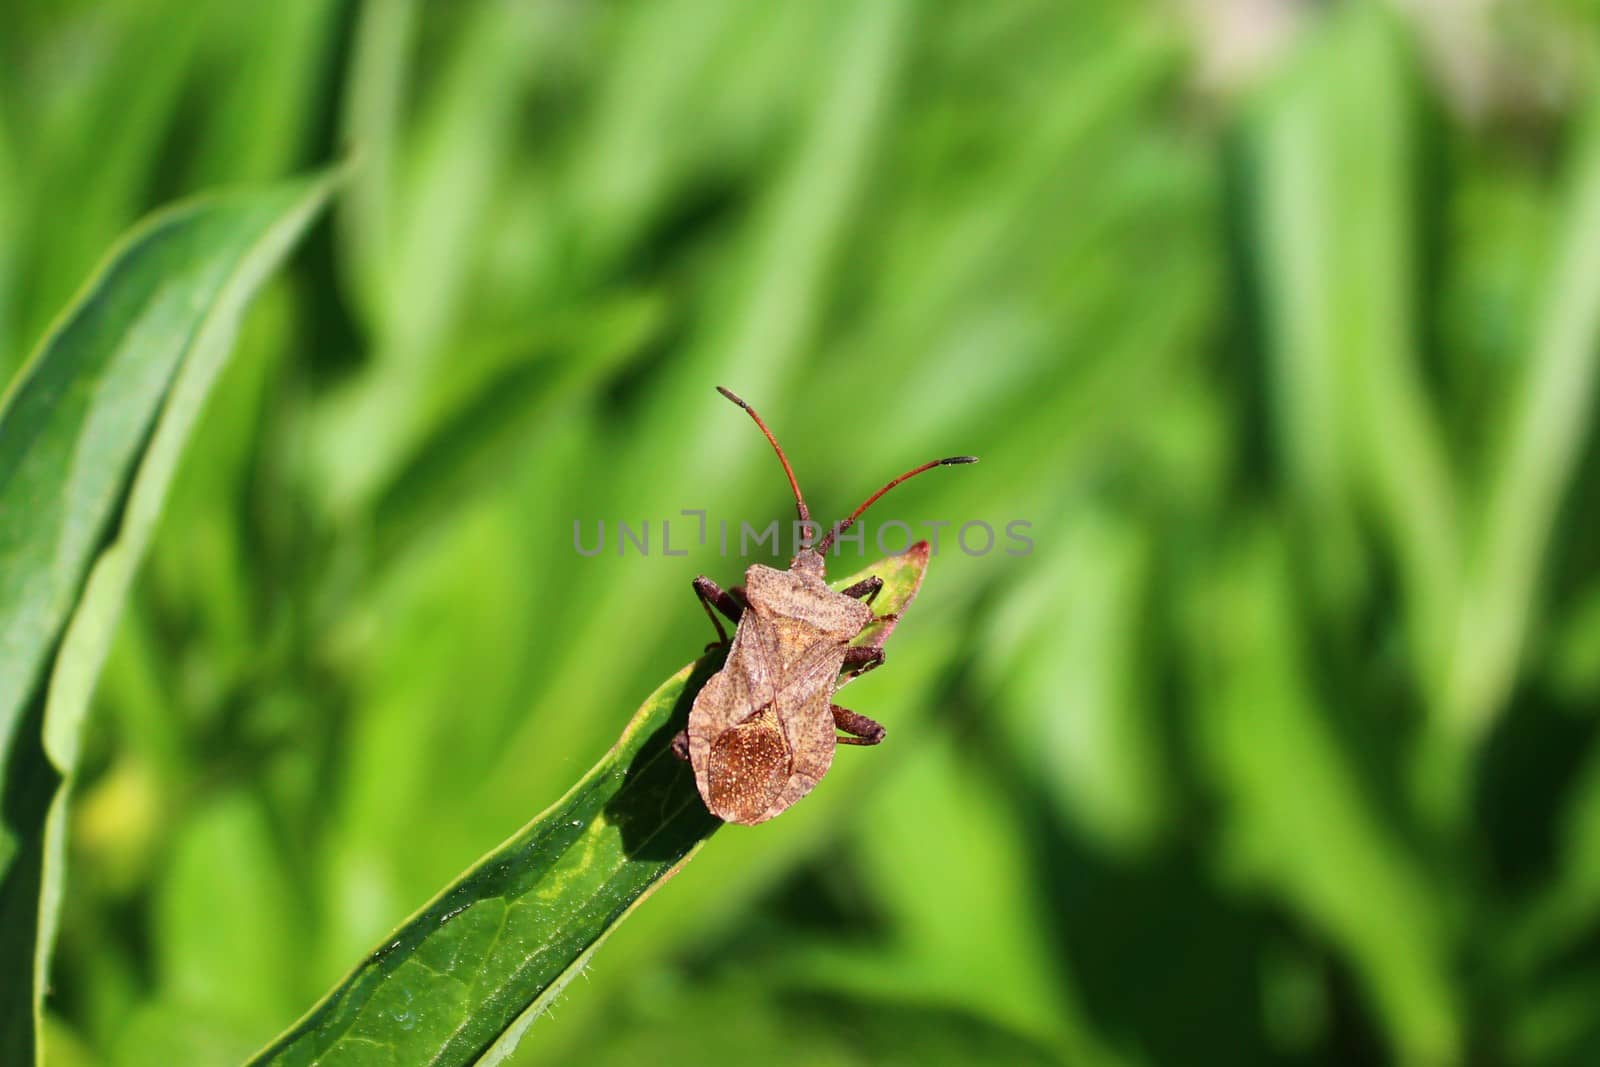 The picture shows a dock bug on a peony.